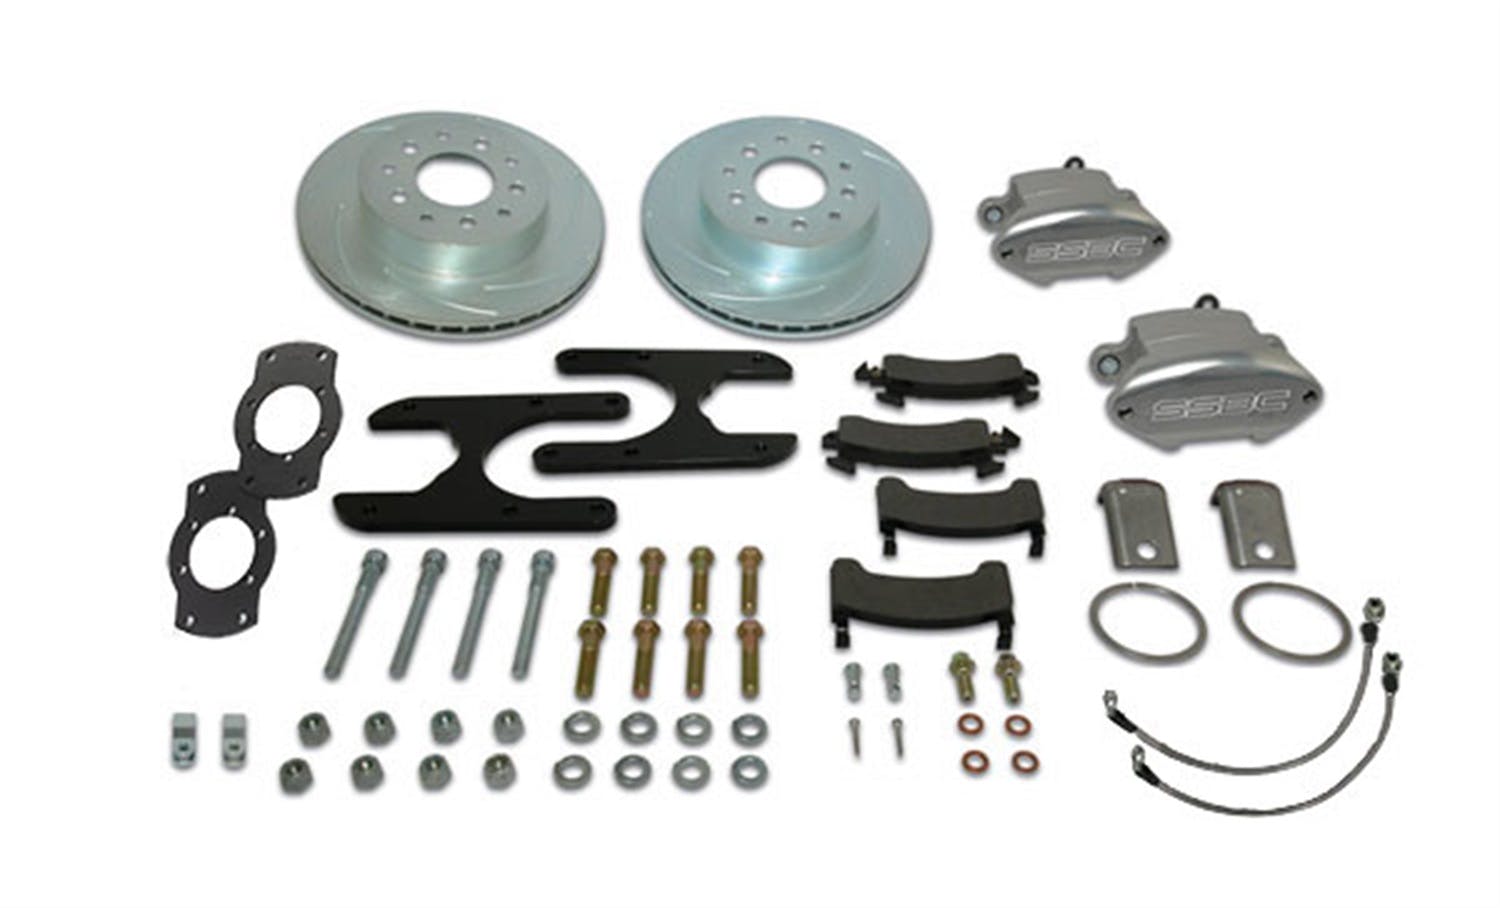 Stainless Steel Brakes A130-5BK Sport R1 A130-5 kit w/black calipers